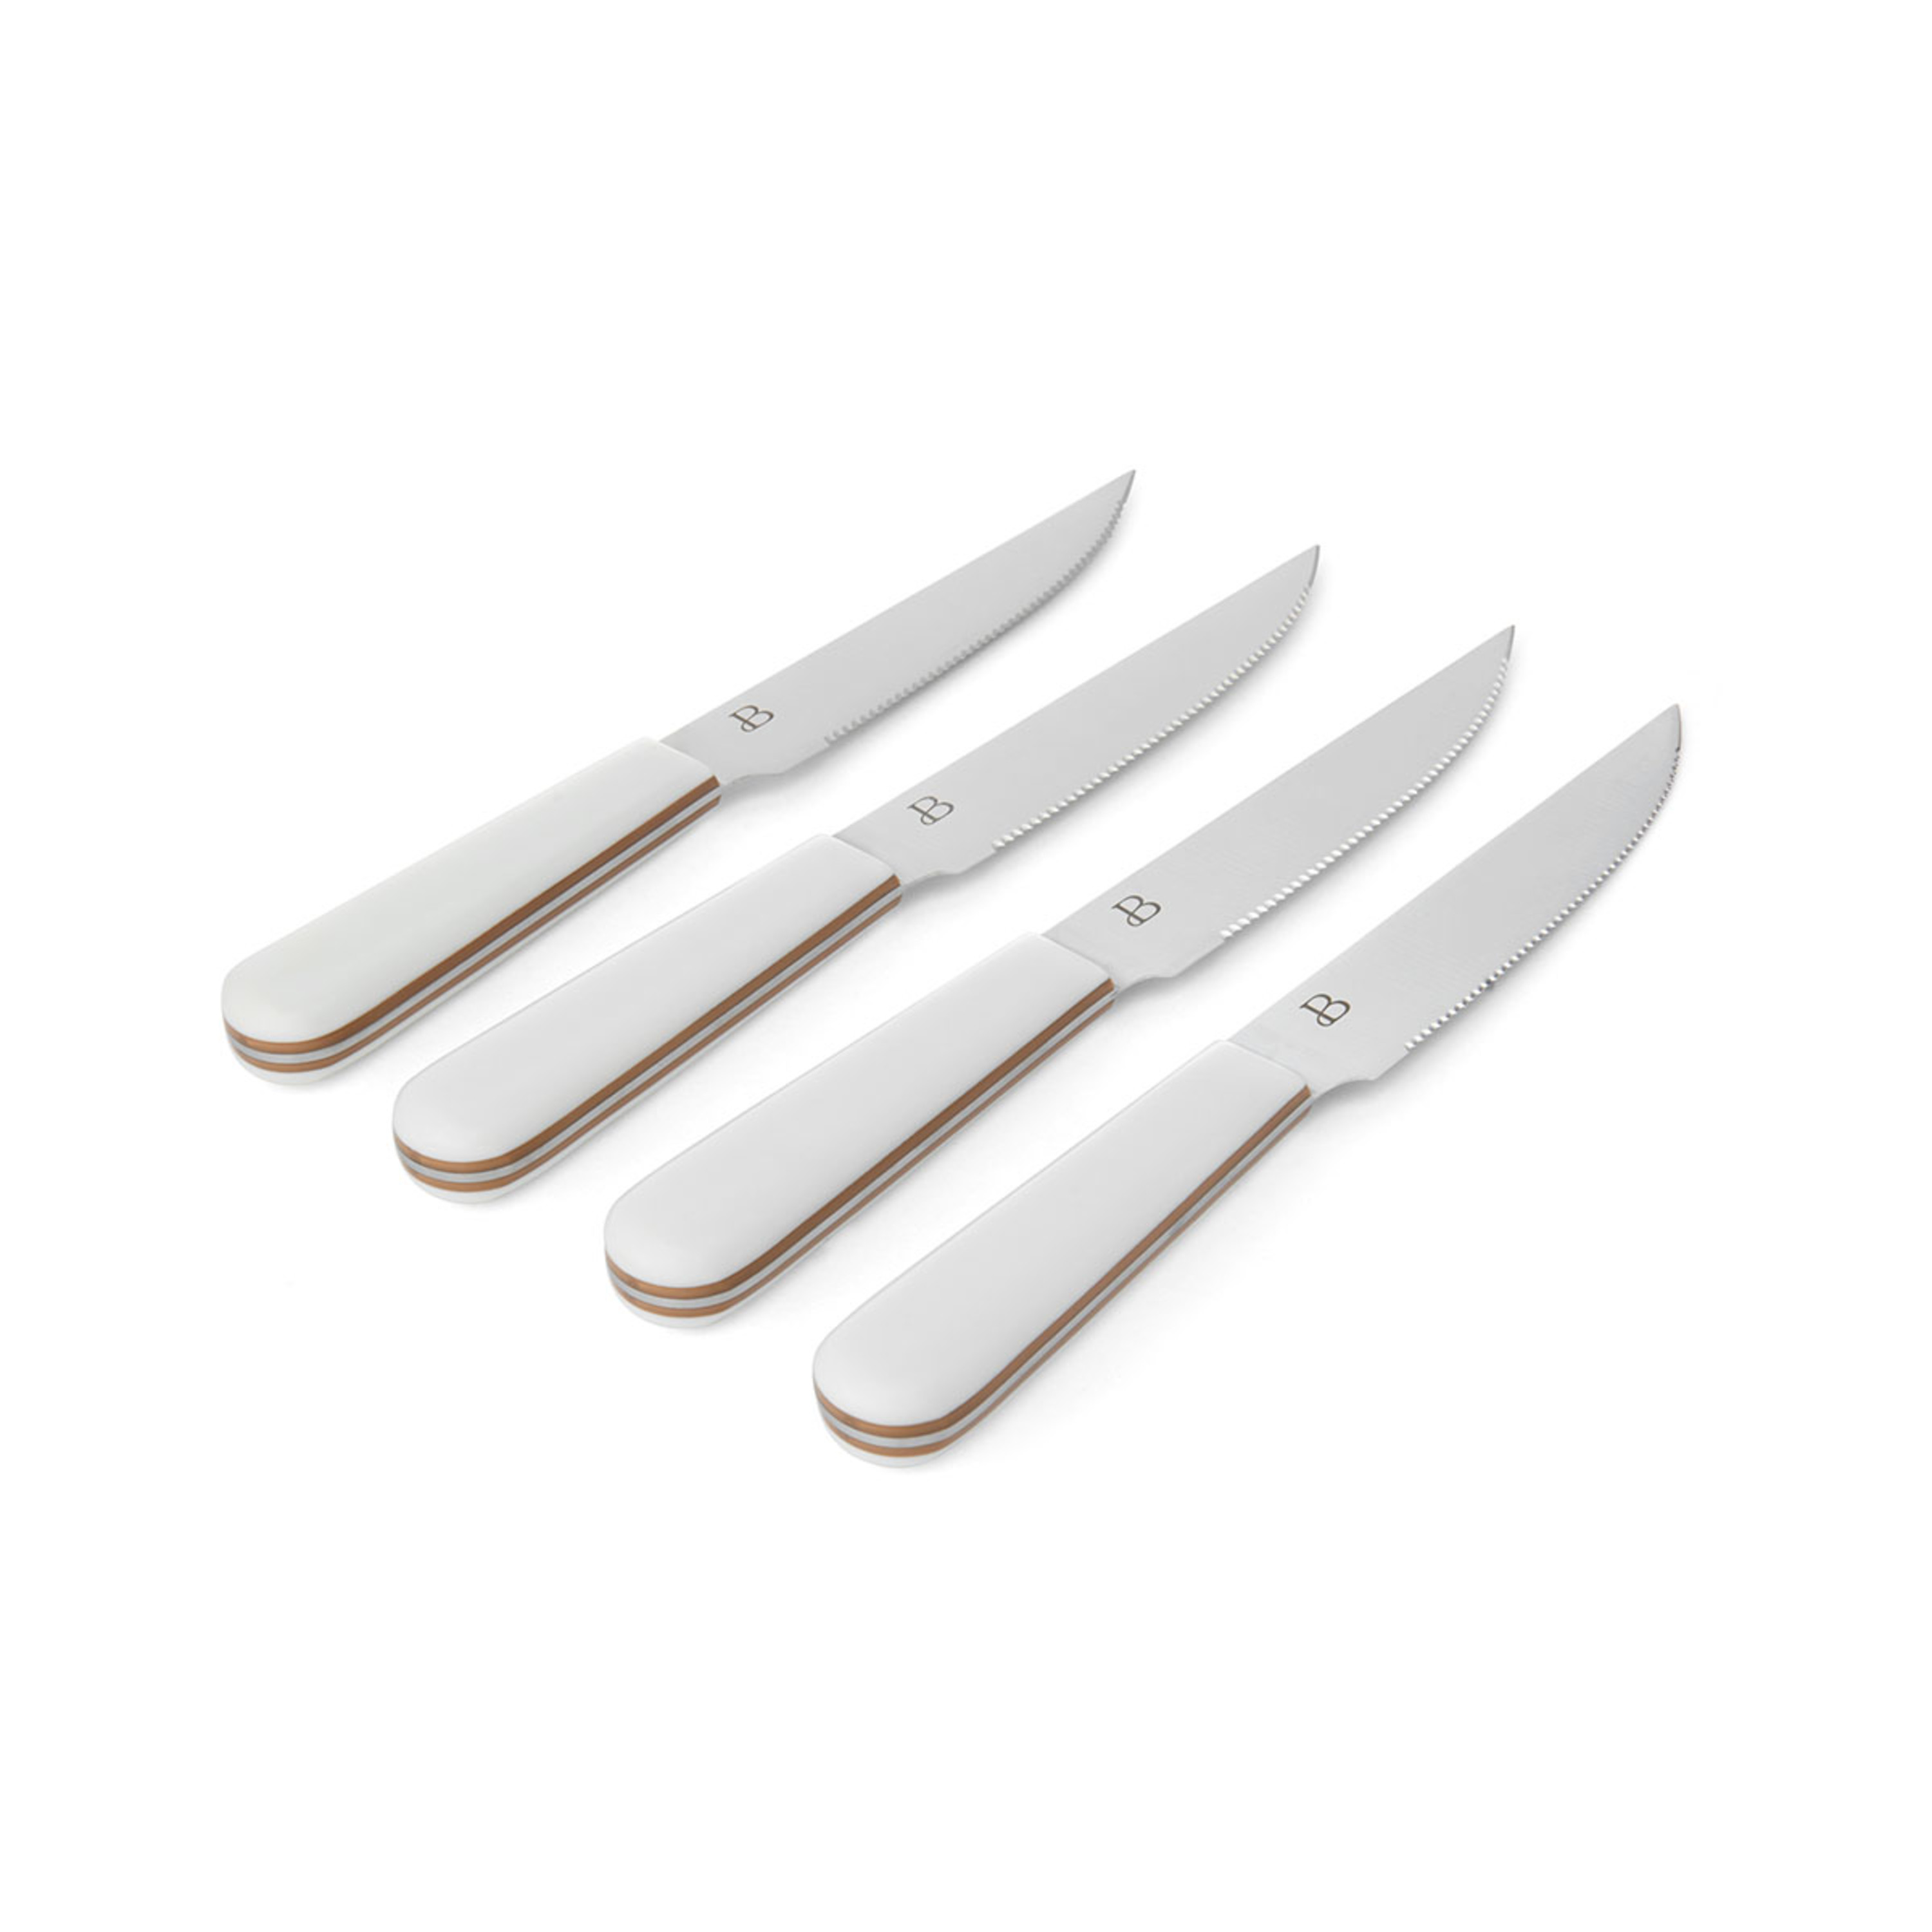 Beautiful 4-piece Forged, Micro-Serrated Kitchen Steak Knife Set in White - image 4 of 6